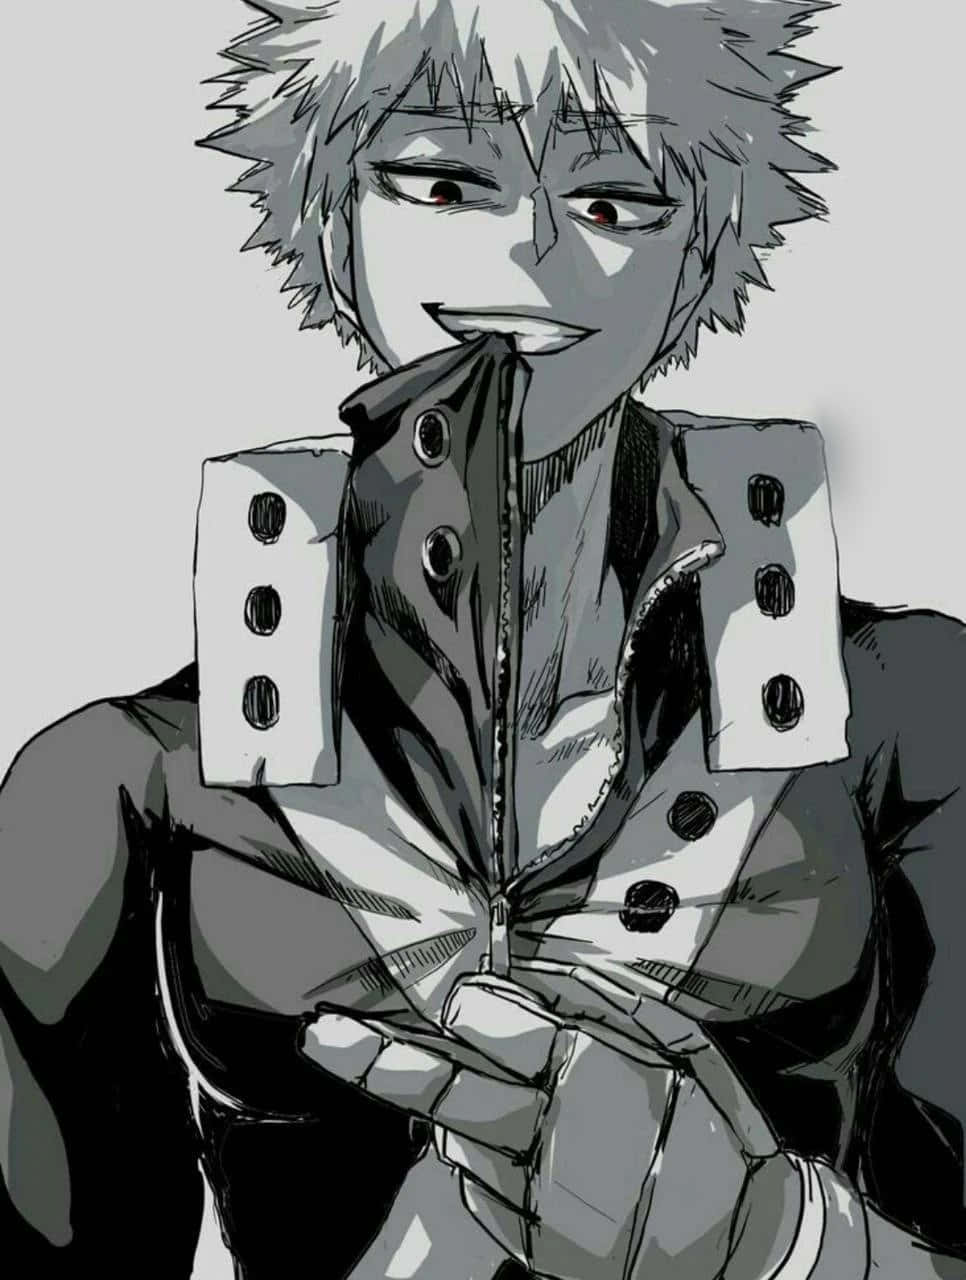 The driving force of Class 1-A, Bakugou